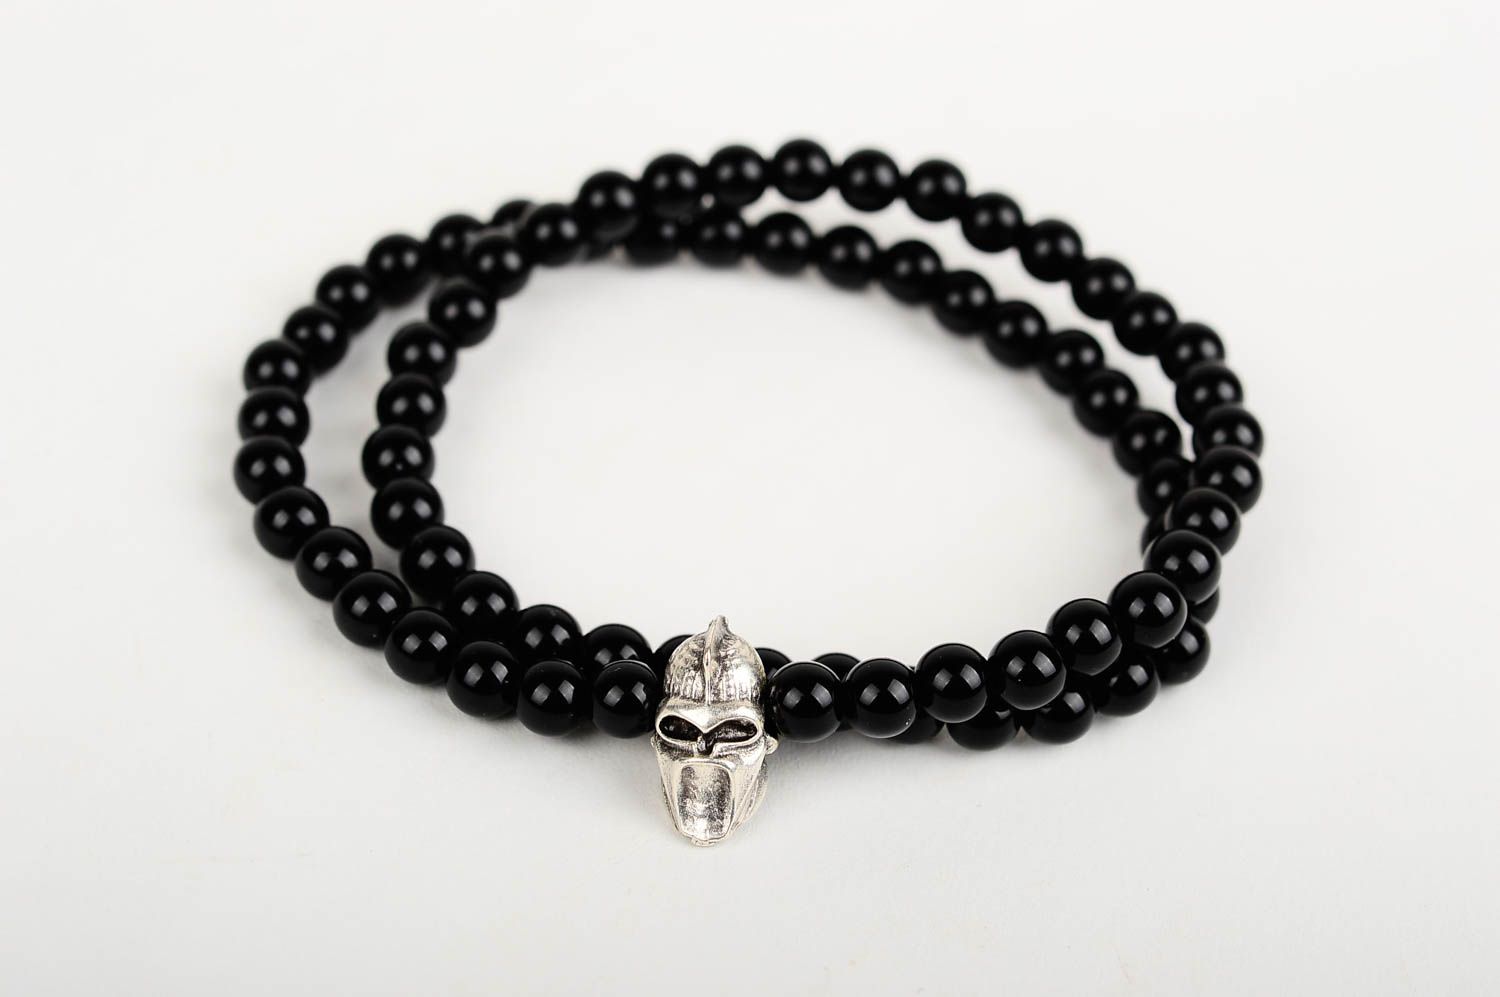 Double bracelet with beads handmade accessories wrist bracelet with skull   photo 1